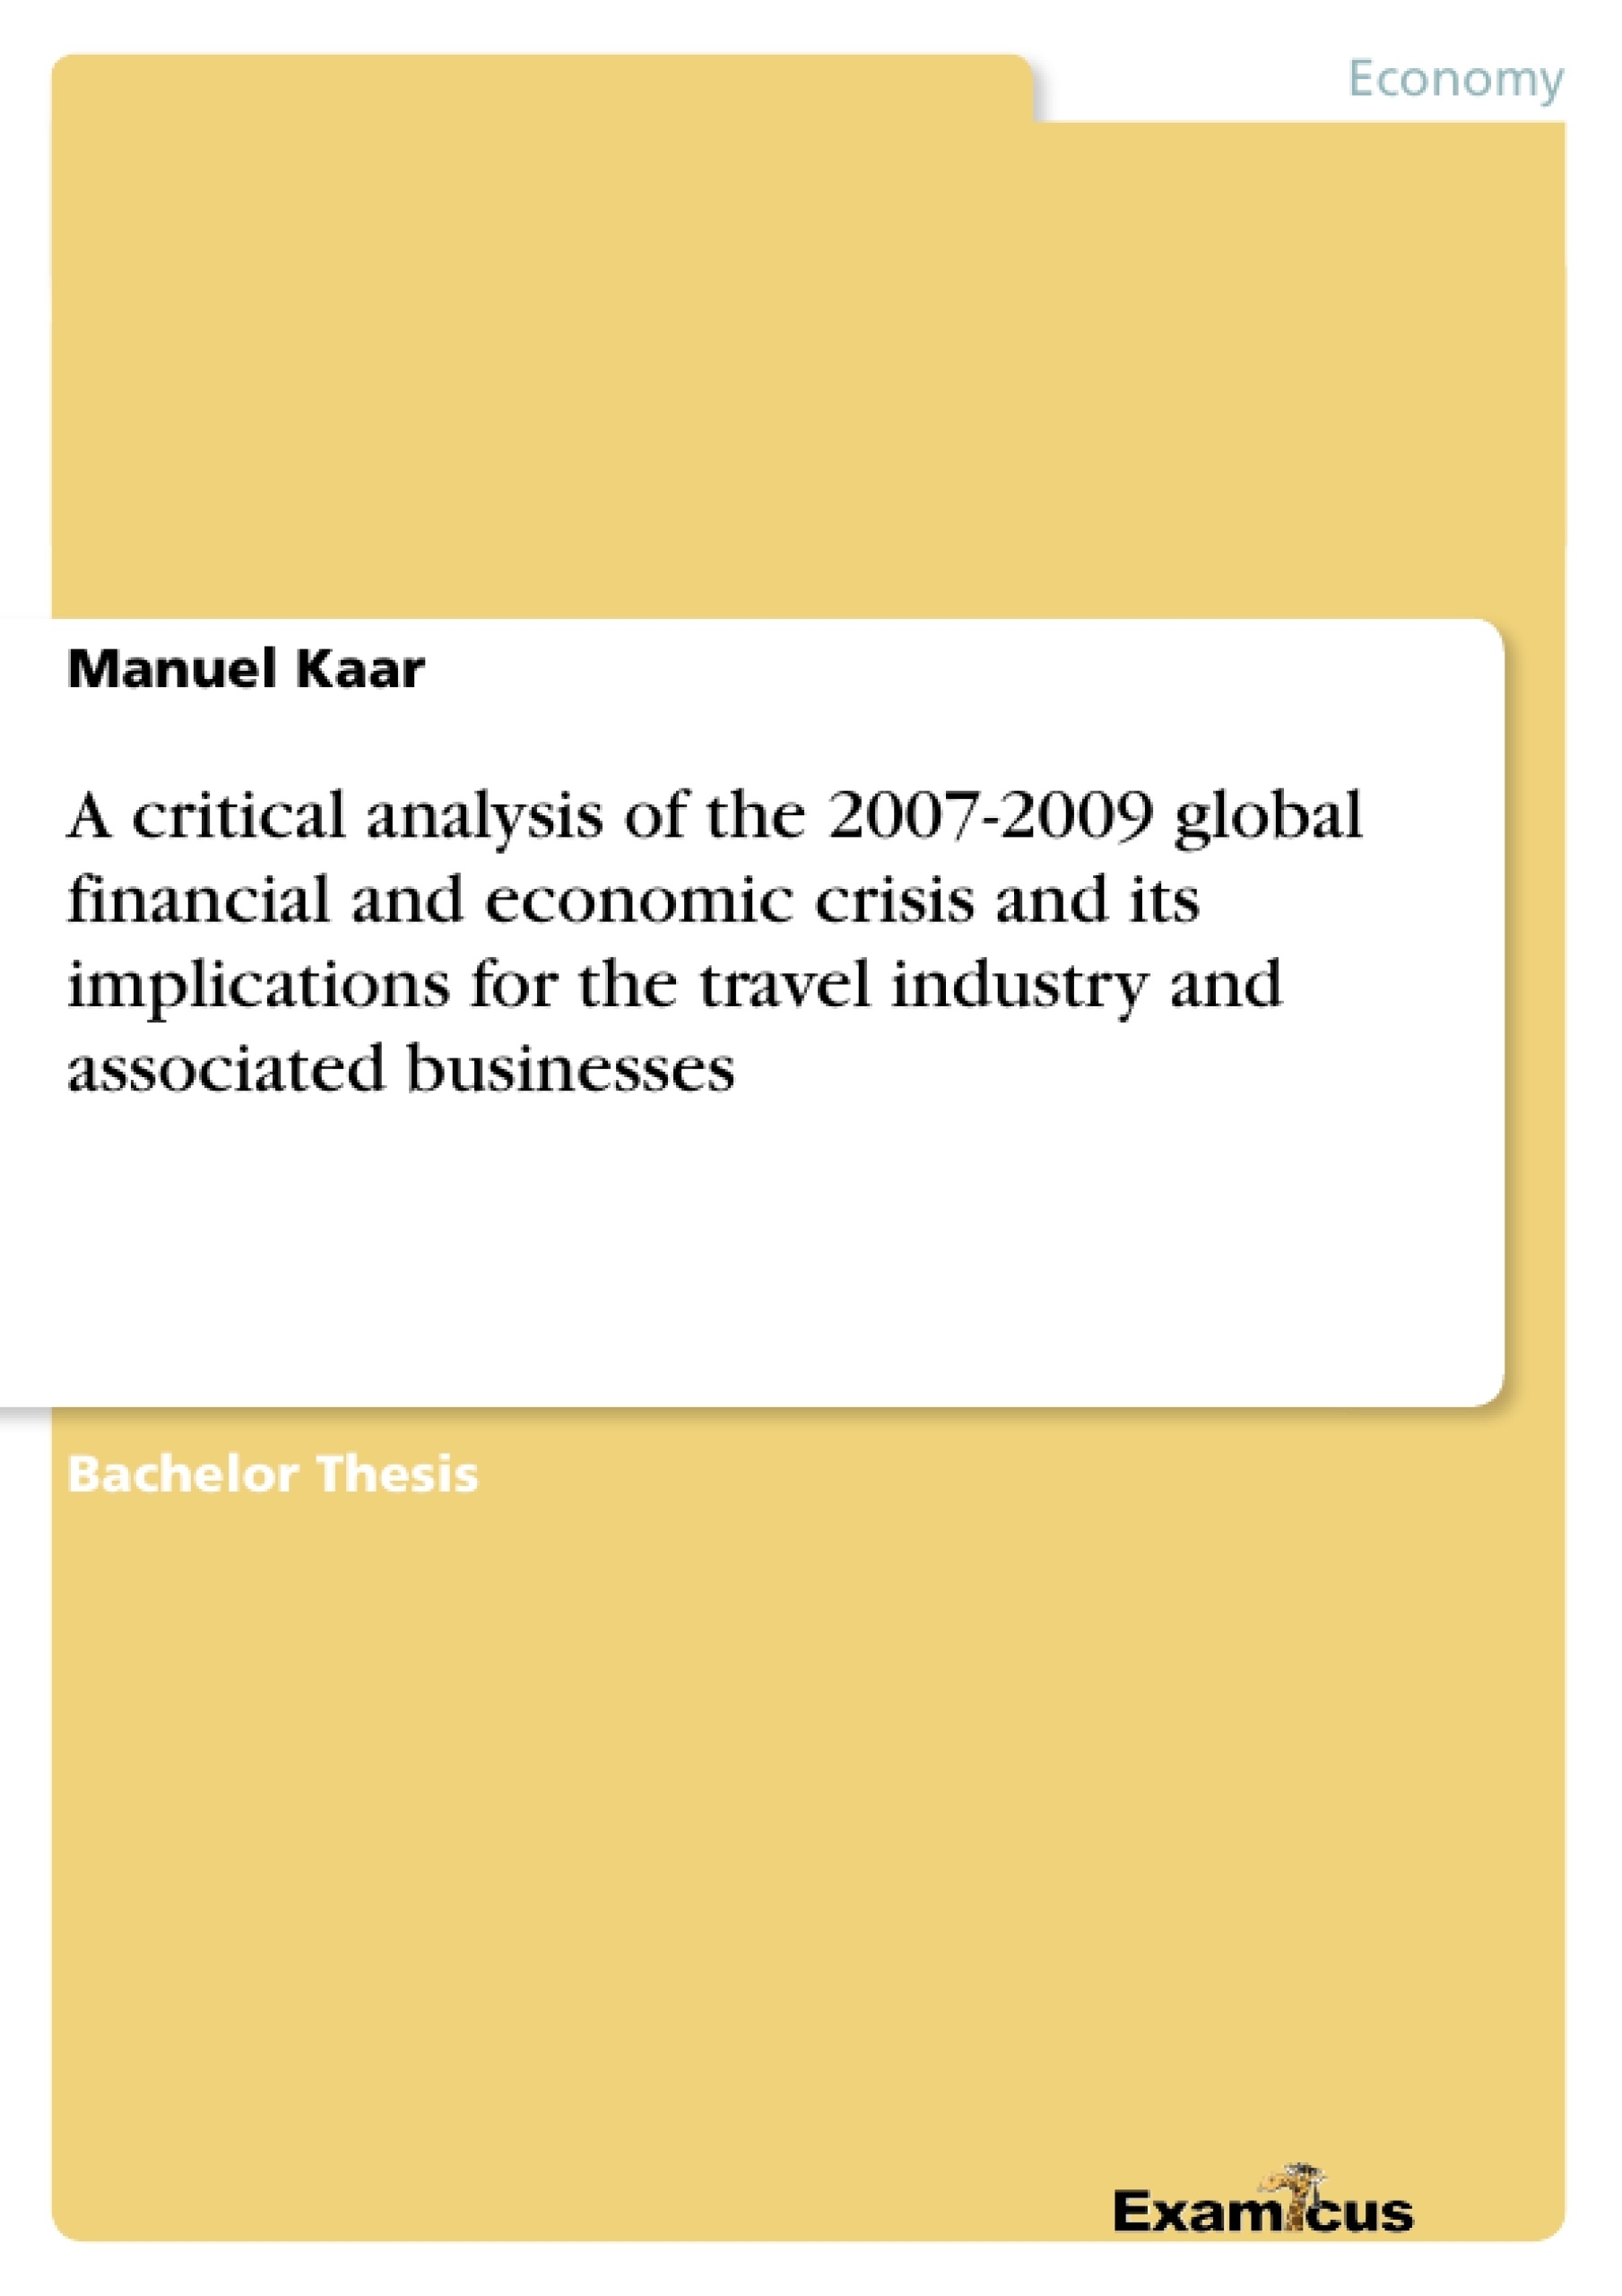 Titre: A critical analysis of the 2007-2009 global financial and economic crisis and its implications for the travel industry and associated businesses